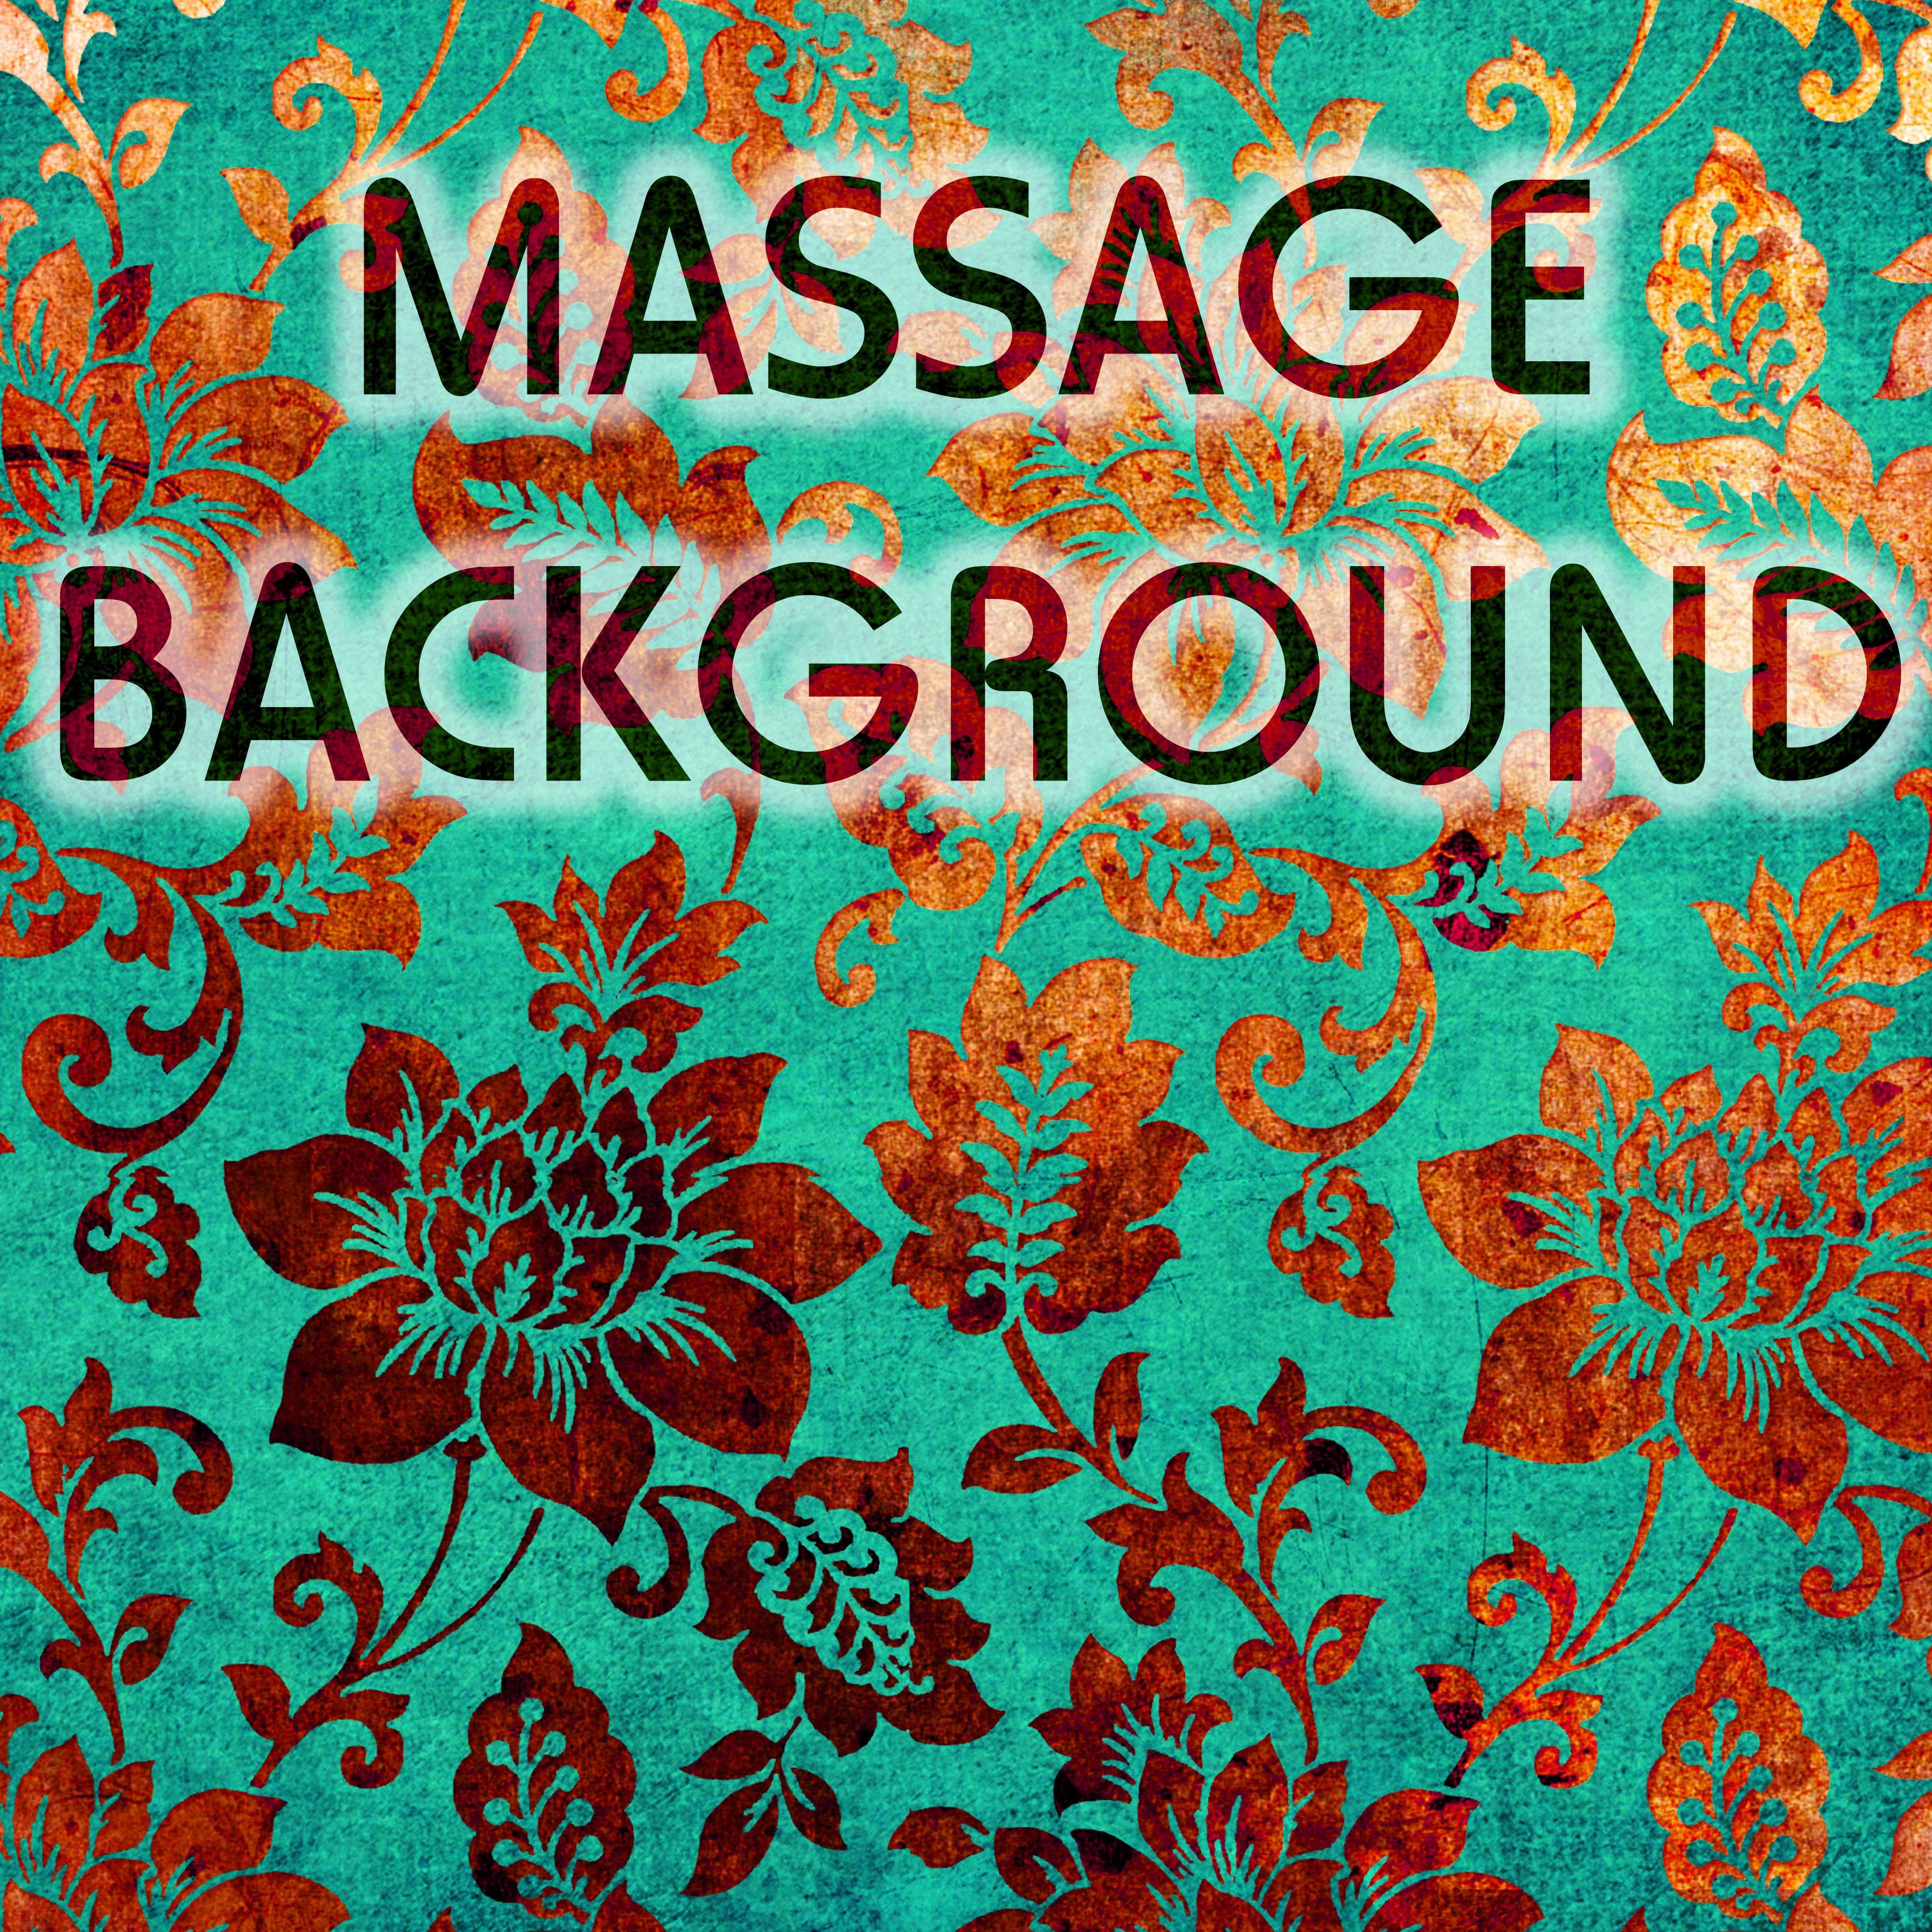 Massage Background Best Collection - TOP 30 Massage Spa Songs